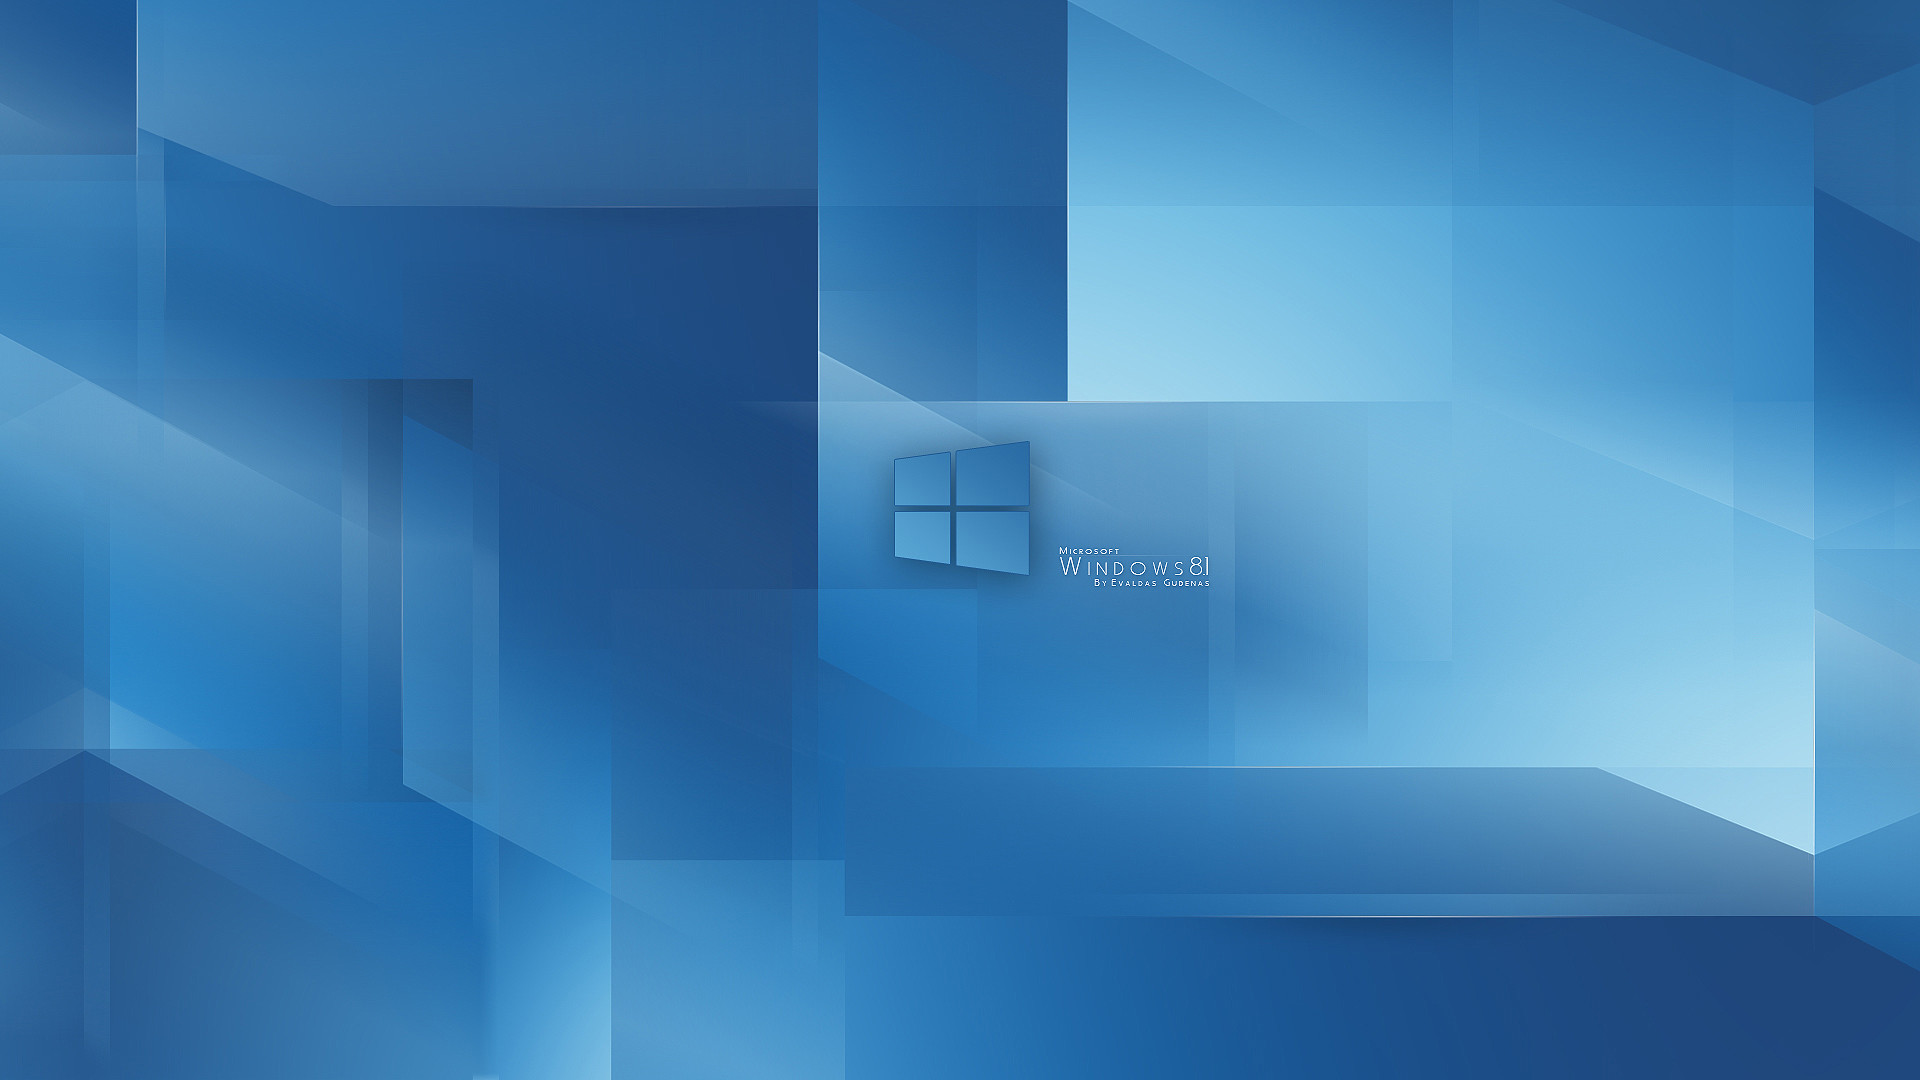 1920x1080 More Windows 8.1 wallpapers | Windows 8 wallpapers